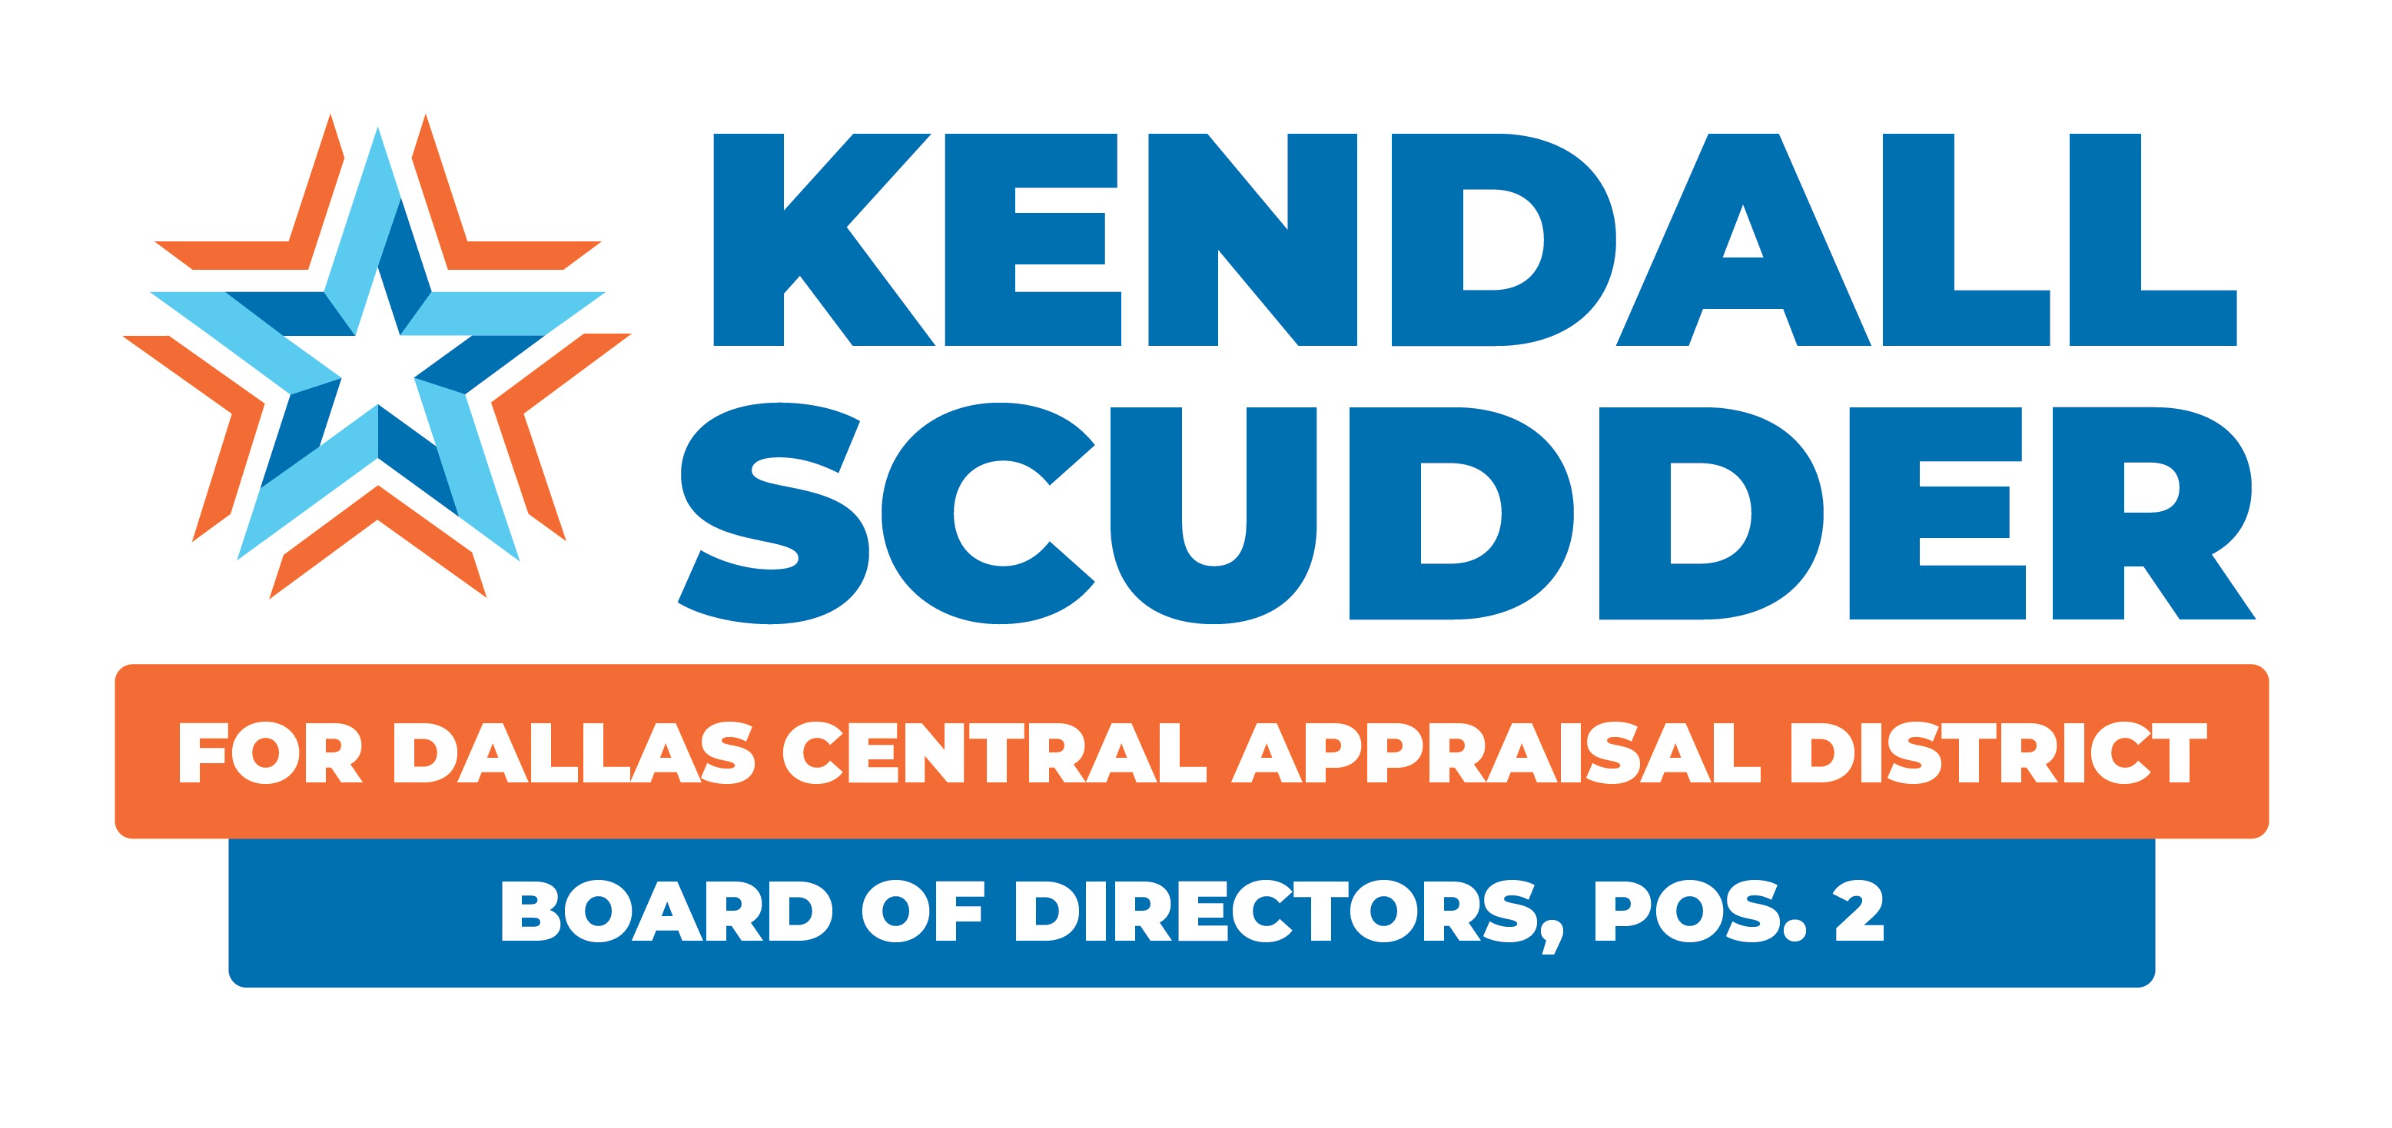 The Kendall Scudder Campaign logo